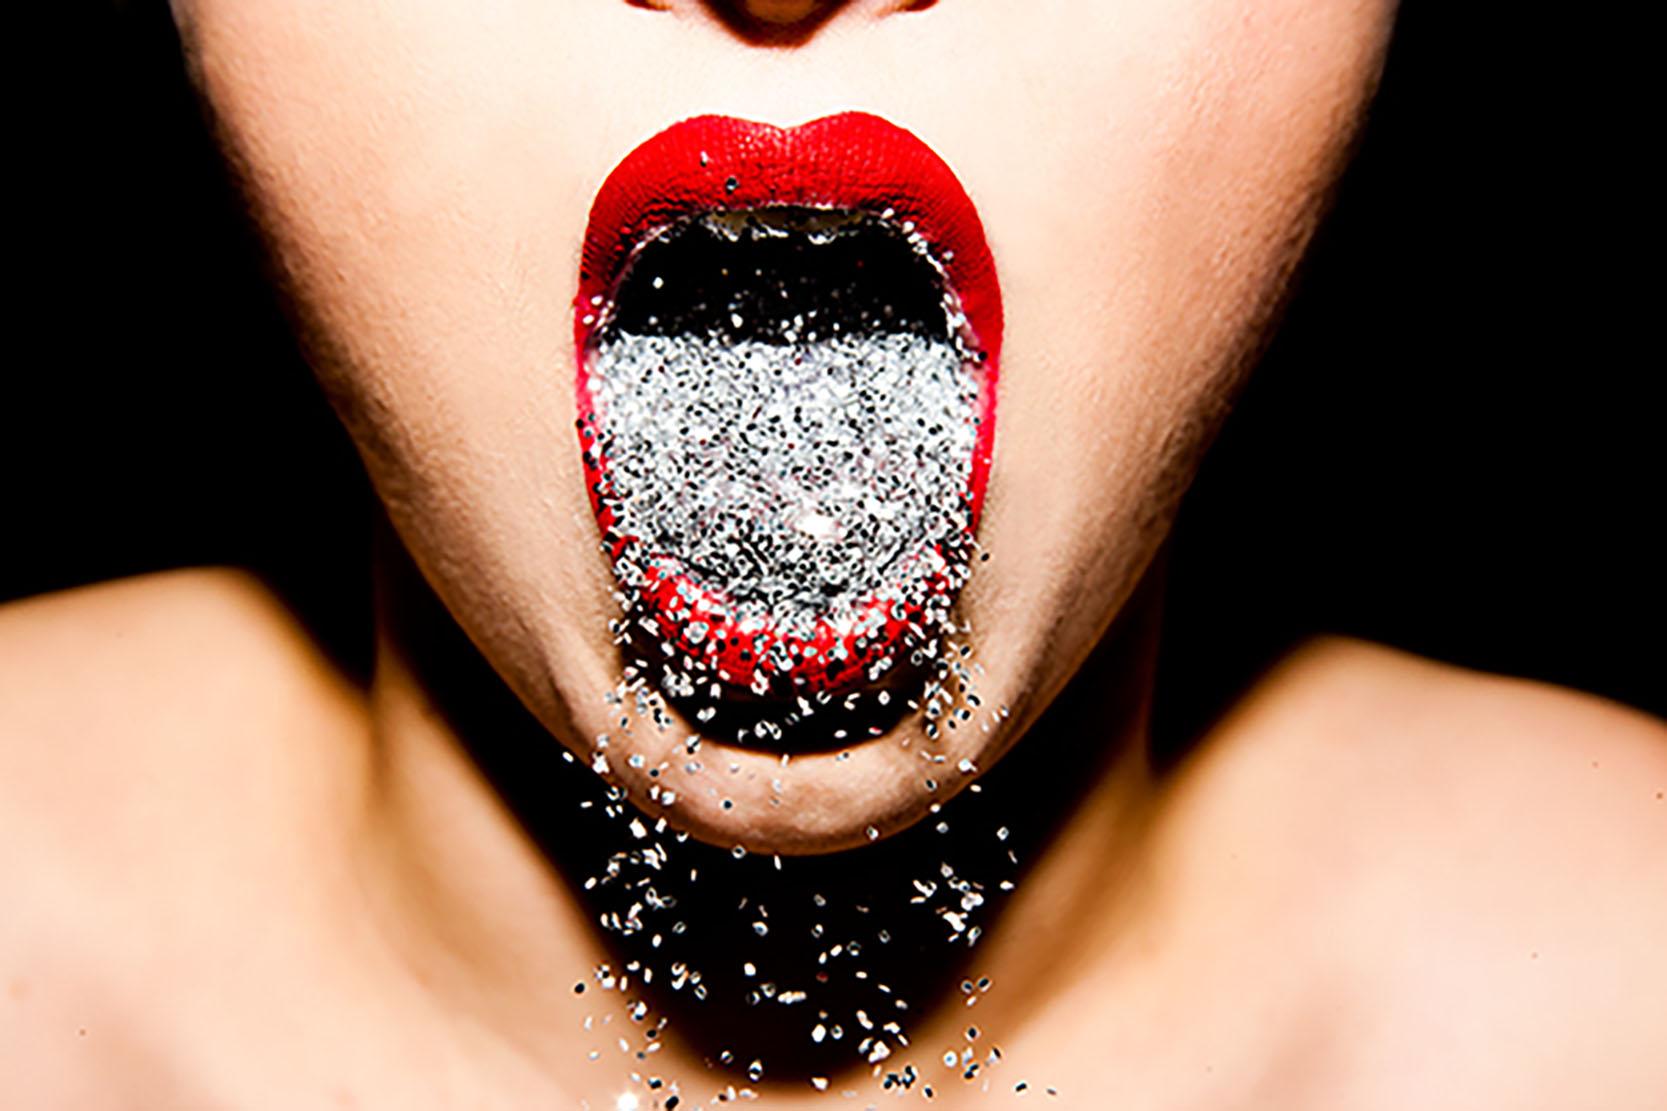 Tyler Shields, 'Glitter Mouth', 2012
Medium: C-type Photographic Print
Signature: Signed Certificate of Authenticity
Edition of 3
Framed
Contemporary Art Photography
